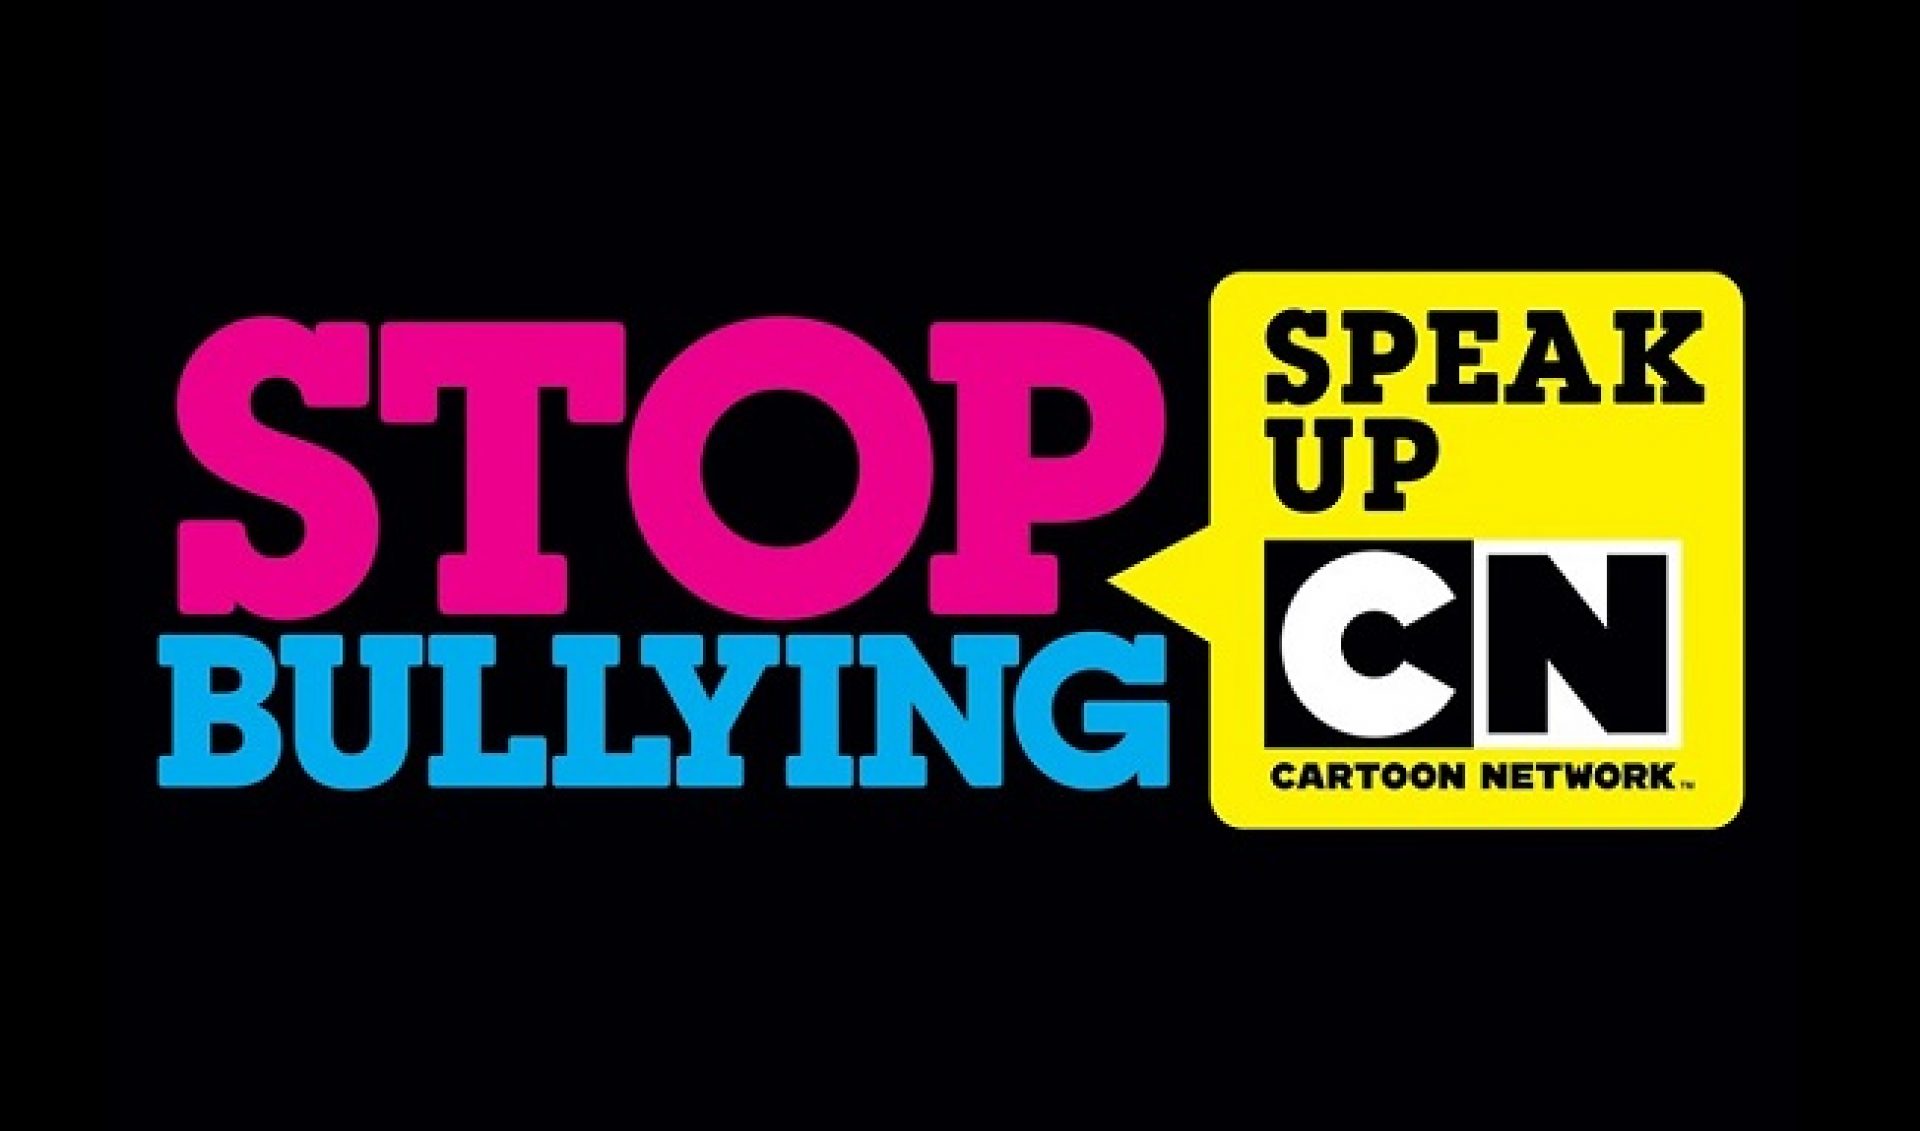 FullBottle, Cartoon Network, Viners Promote Anti-Bullying Campaign